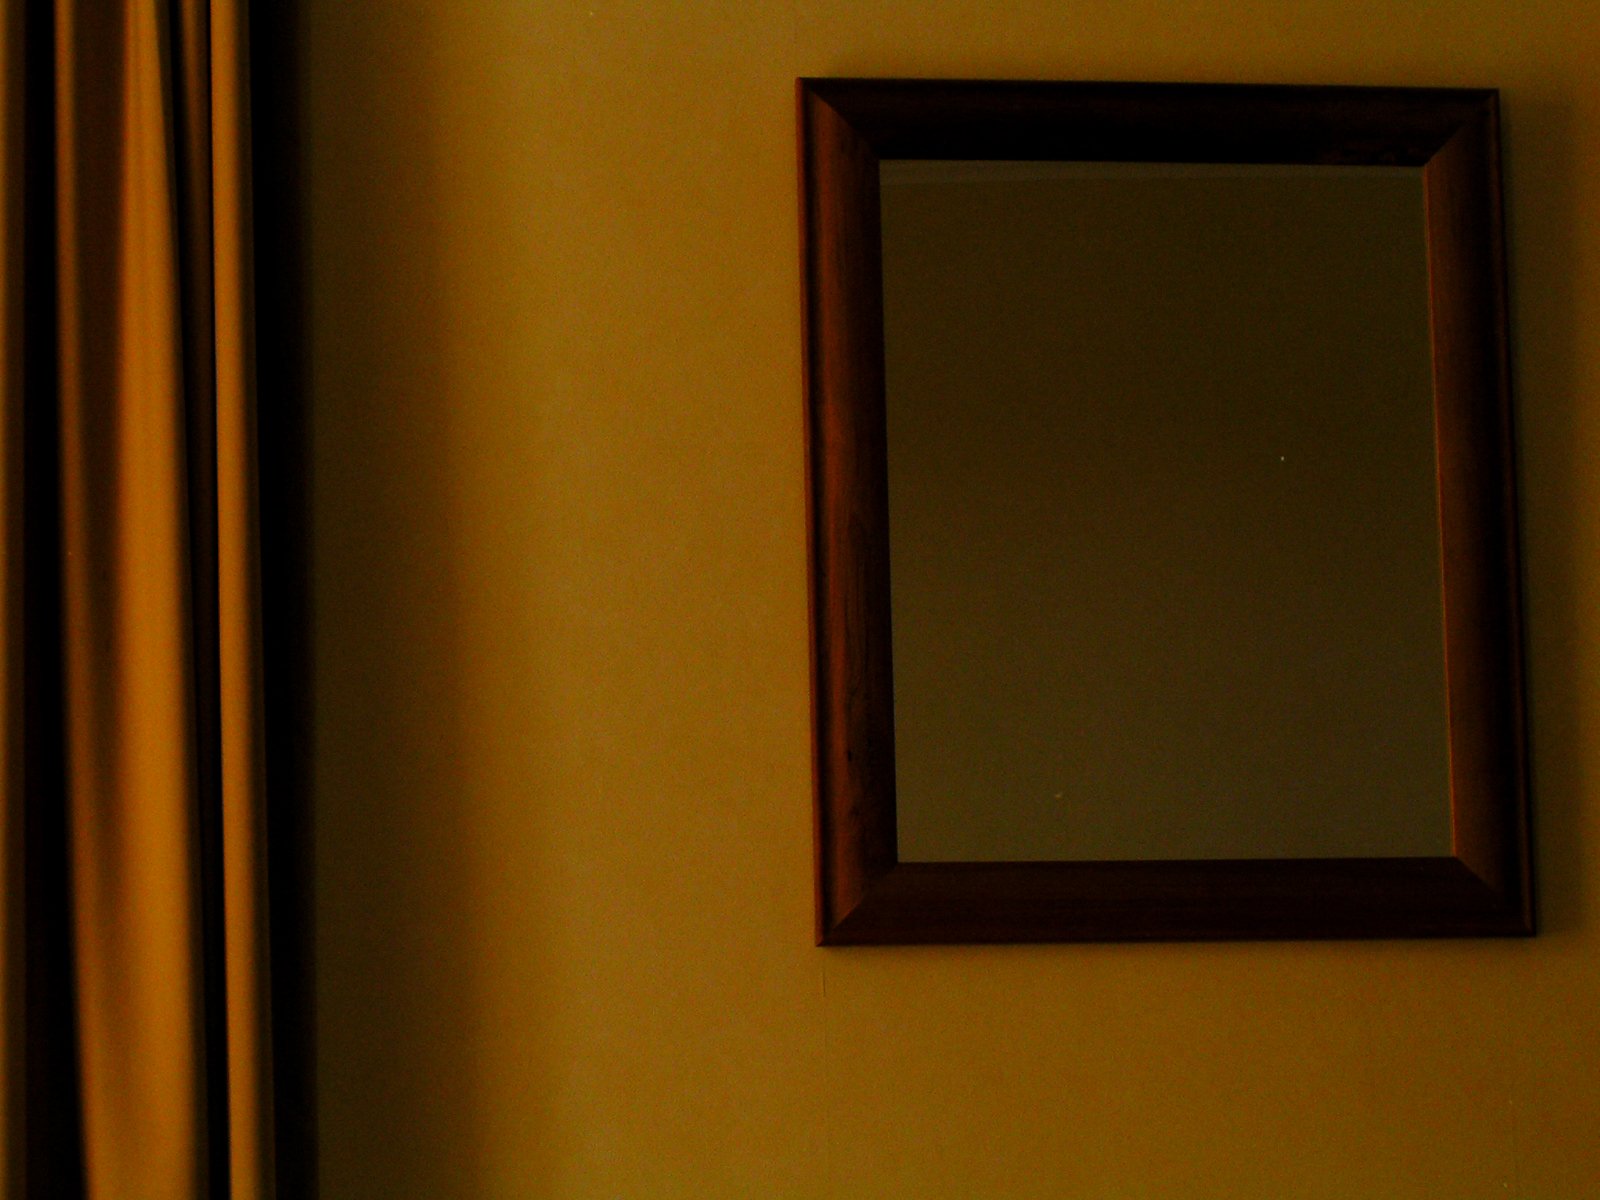 an old mirror hung on a yellow wall near the curtains